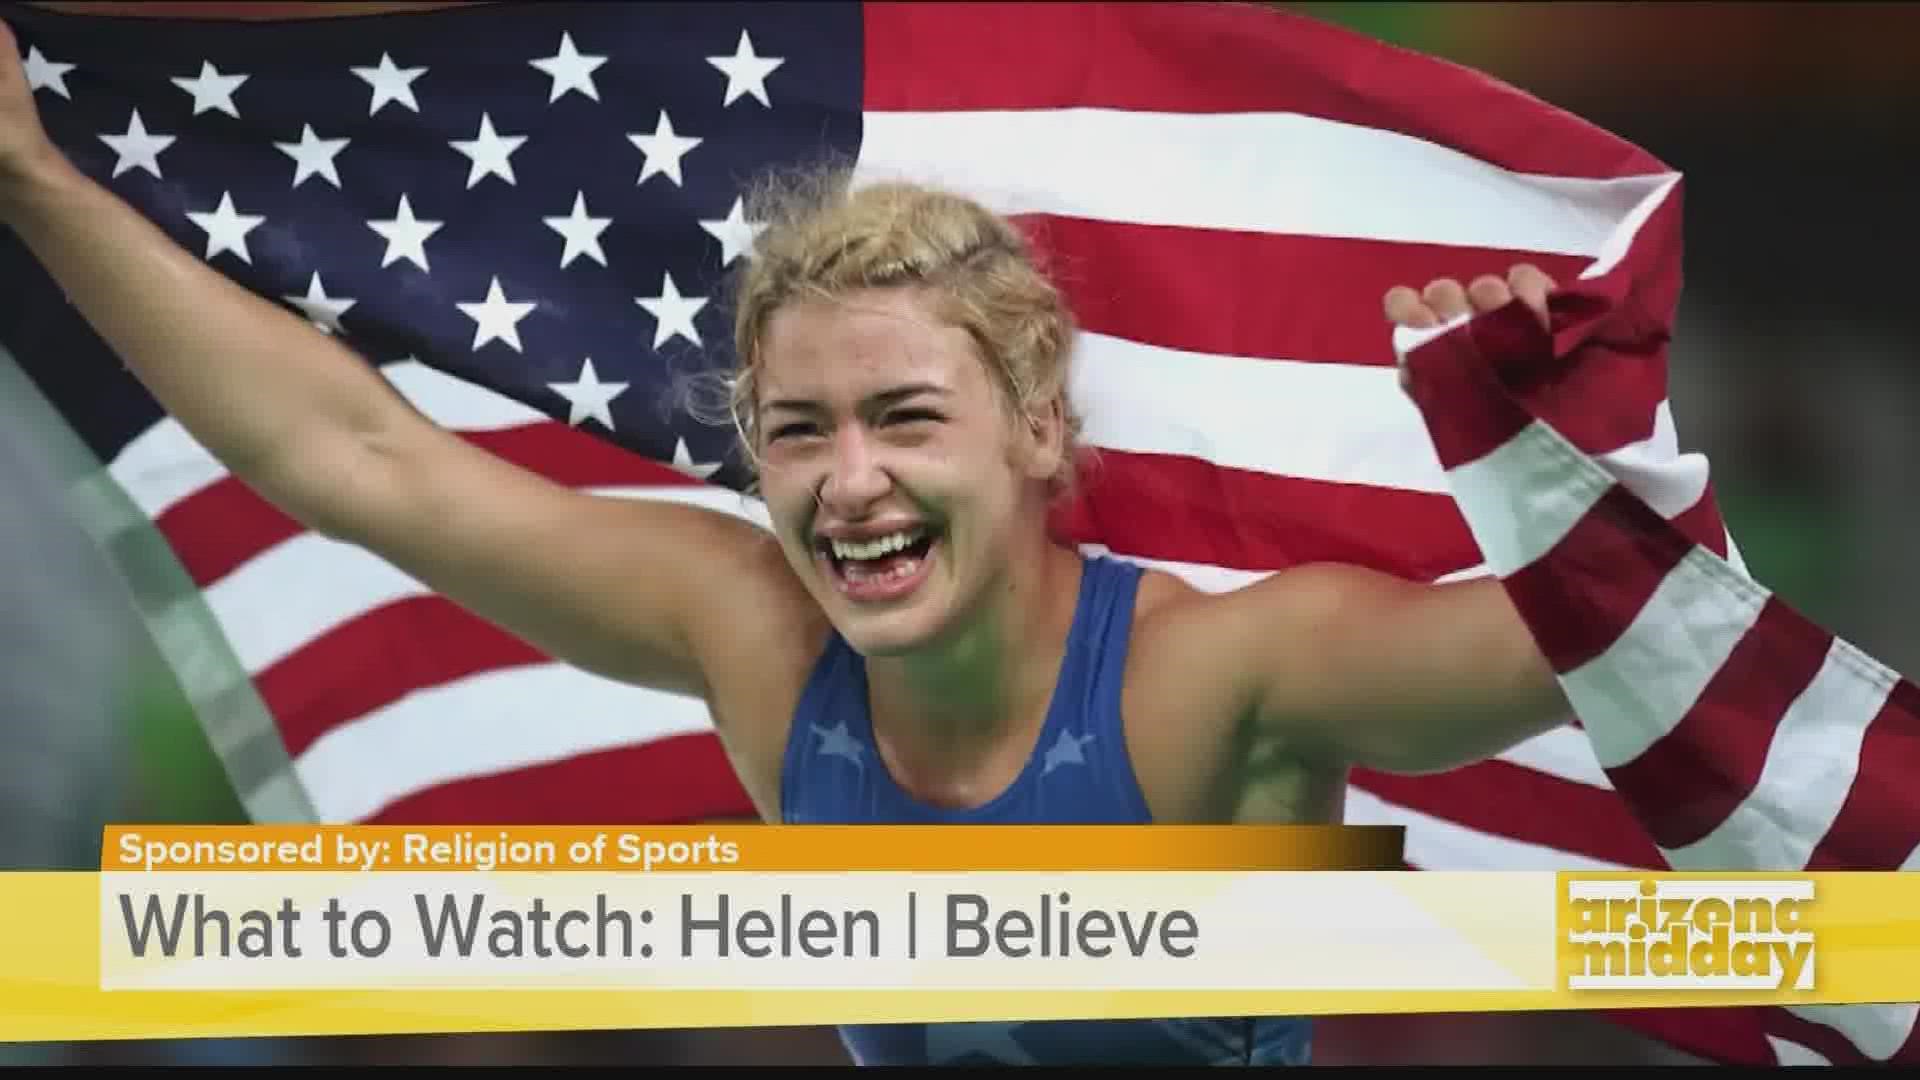 "Helen | Believe" follows Helen Maroulis journey on following a brain injury and her fight back to compete.